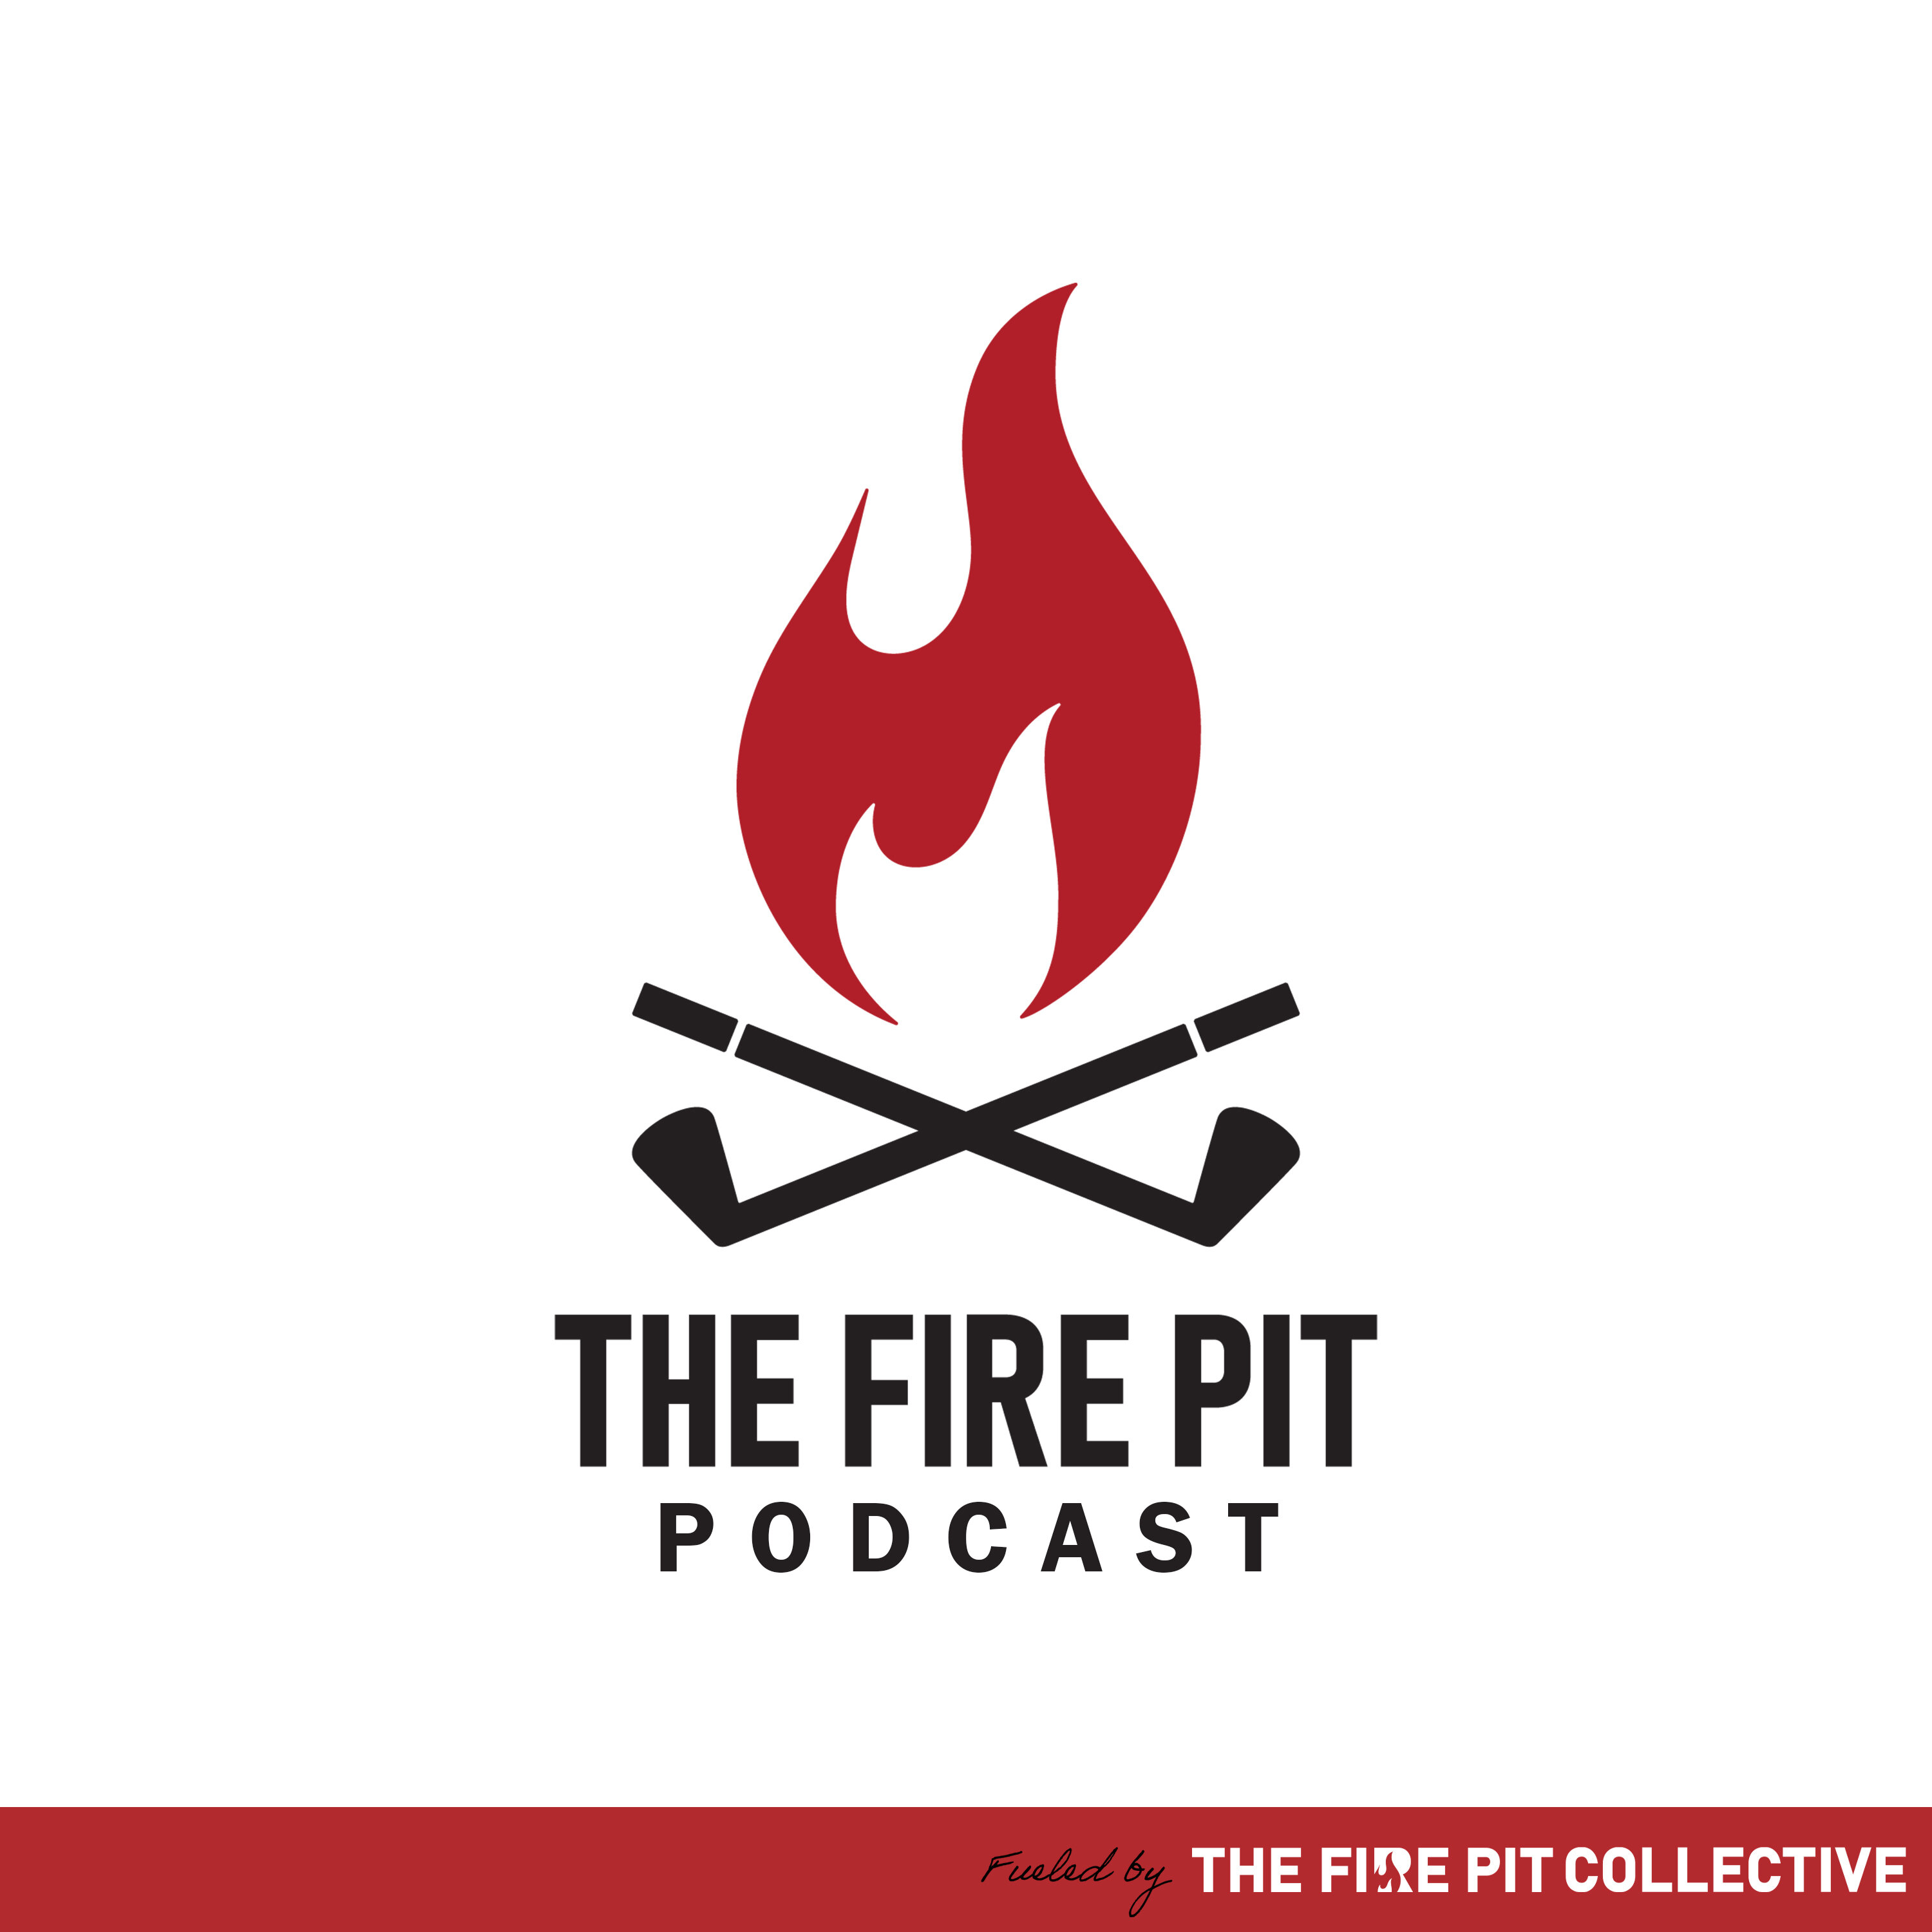 The Fire Pit Podcast:Fire Pit Collective